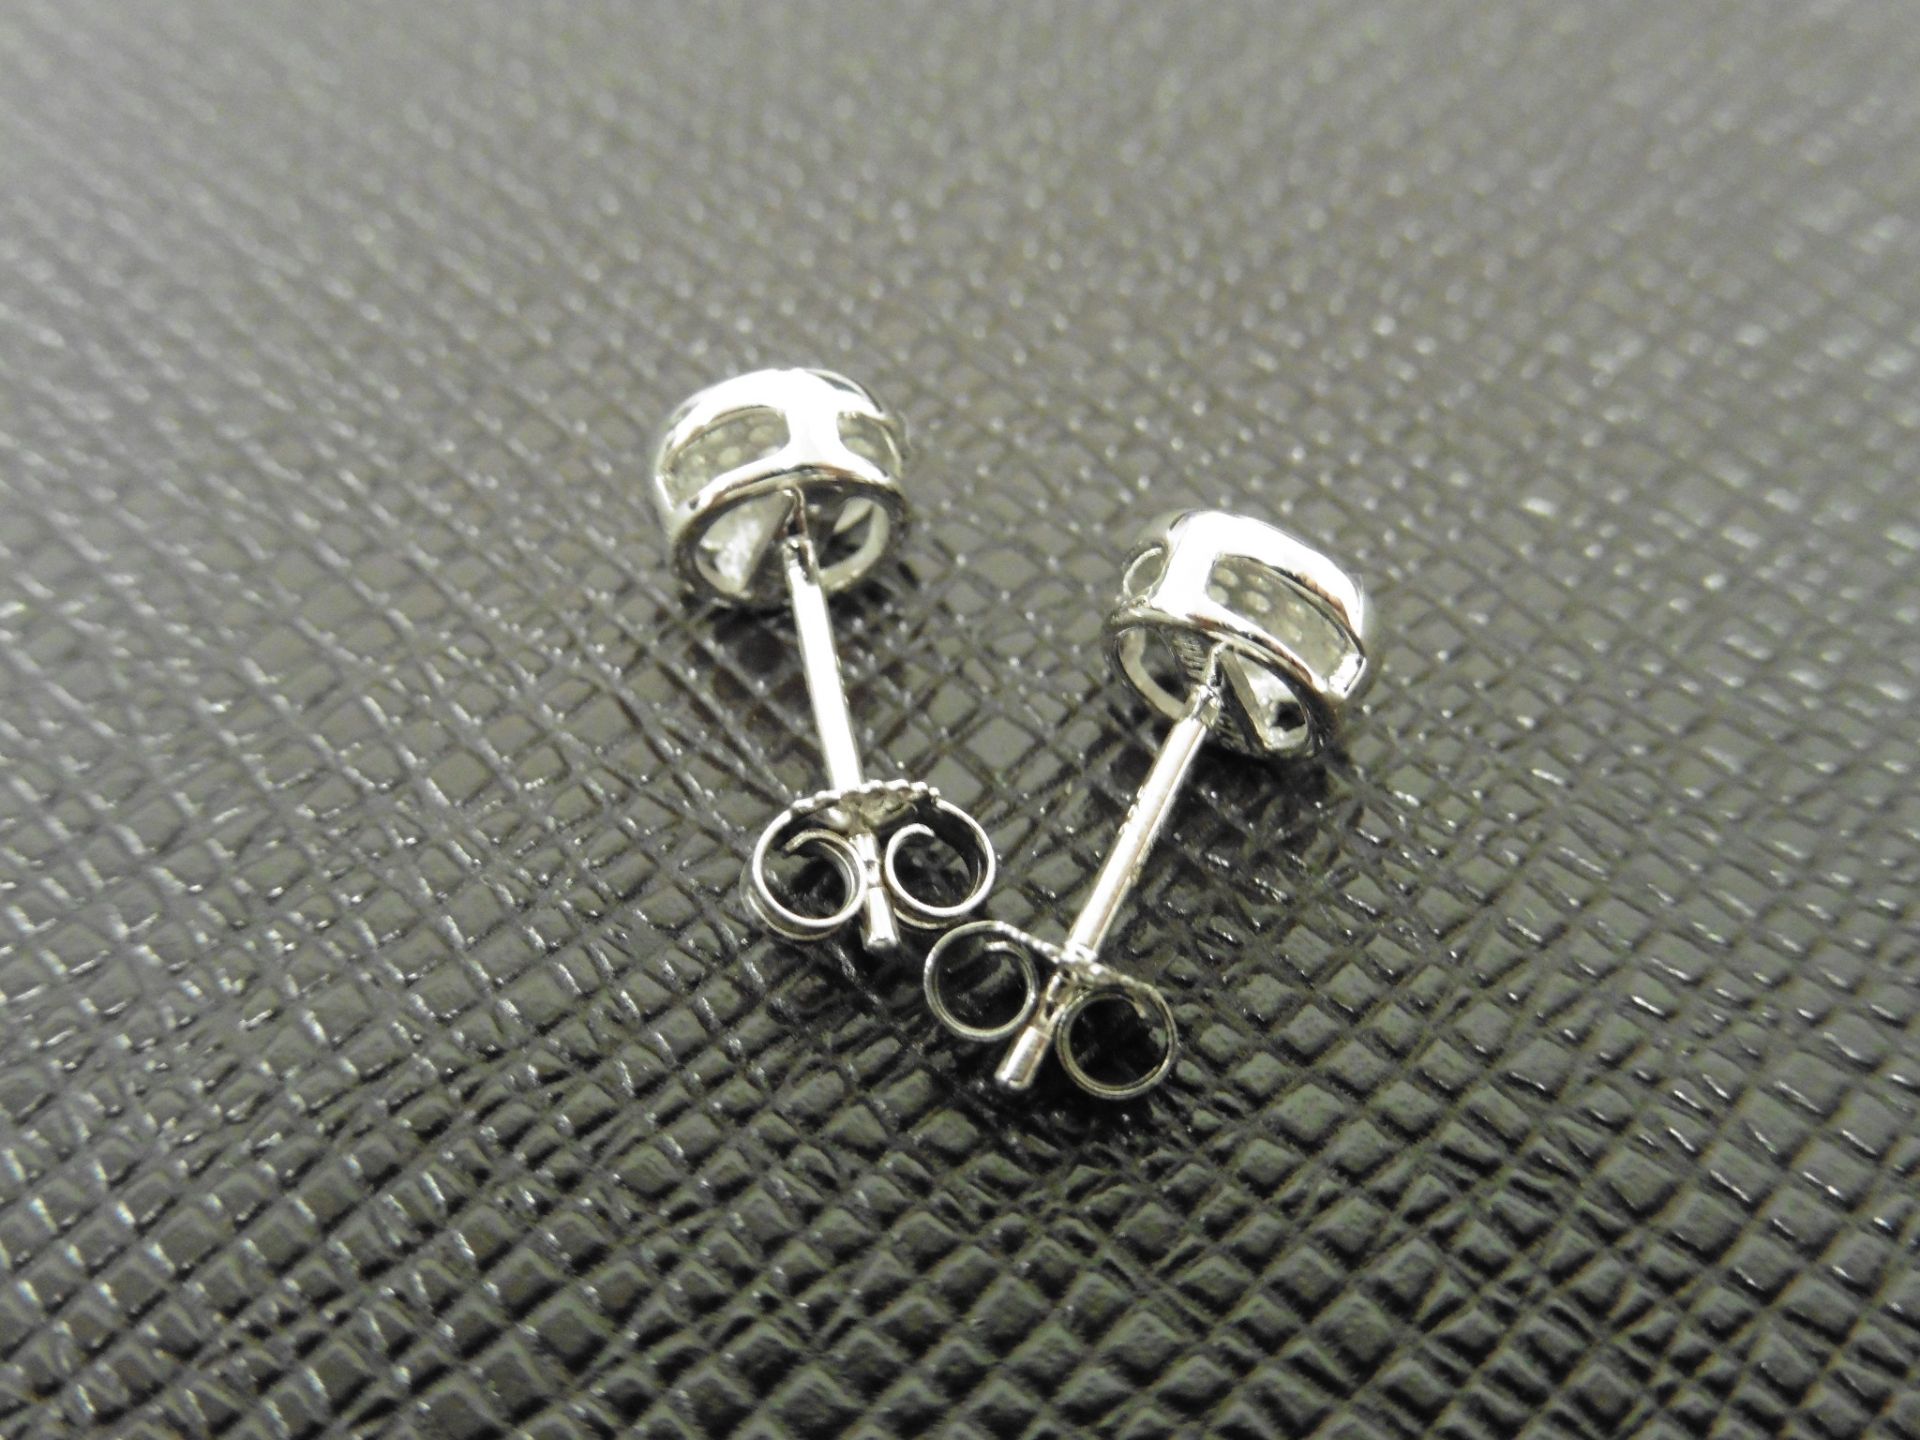 0.17ct illusion set diamond stud earrings in 9ct white gold. Small round cut diamonds - Image 3 of 3